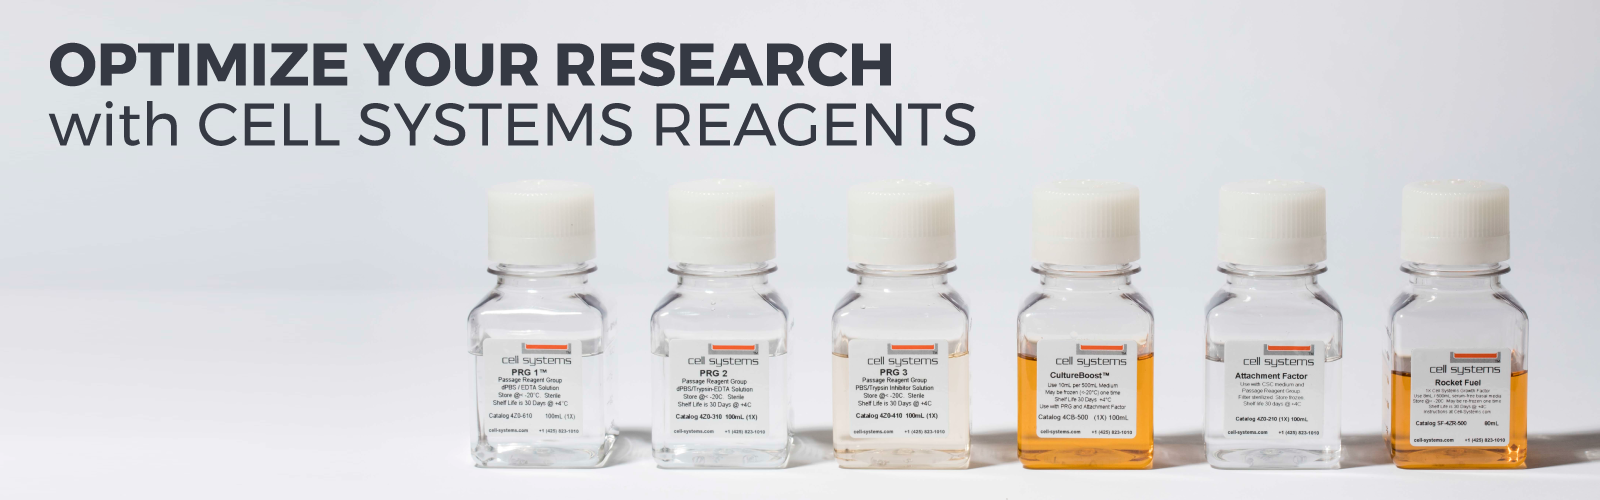 Optimize your research with CELL SYSTEMS REAGENTS